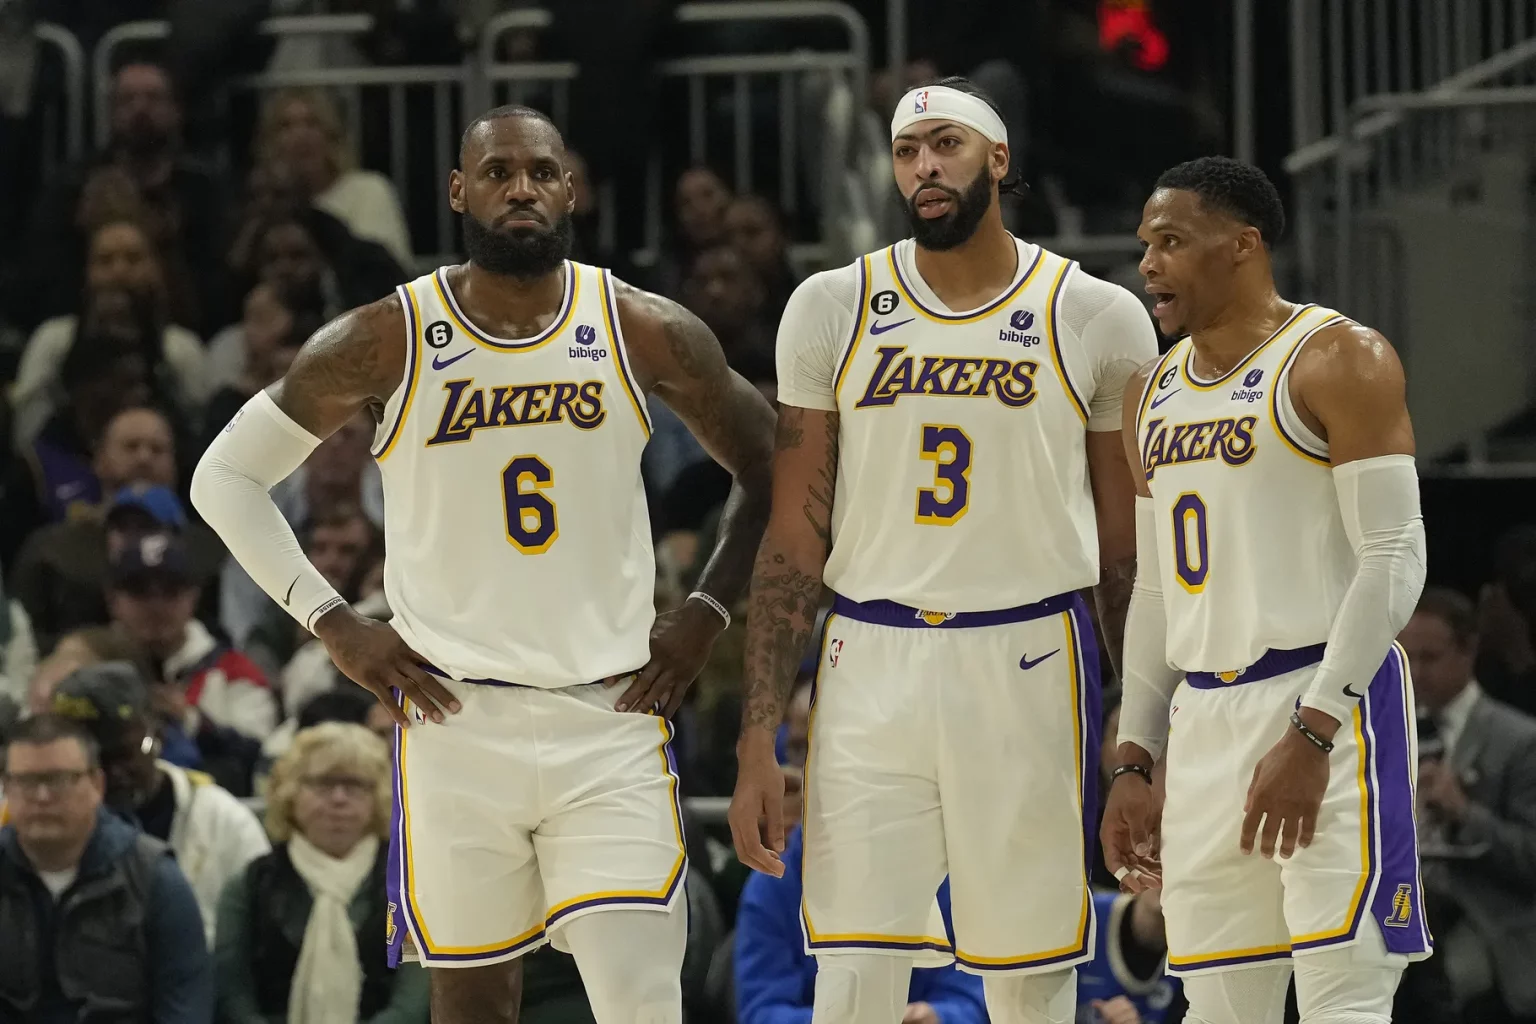 The return of the Lakers big three